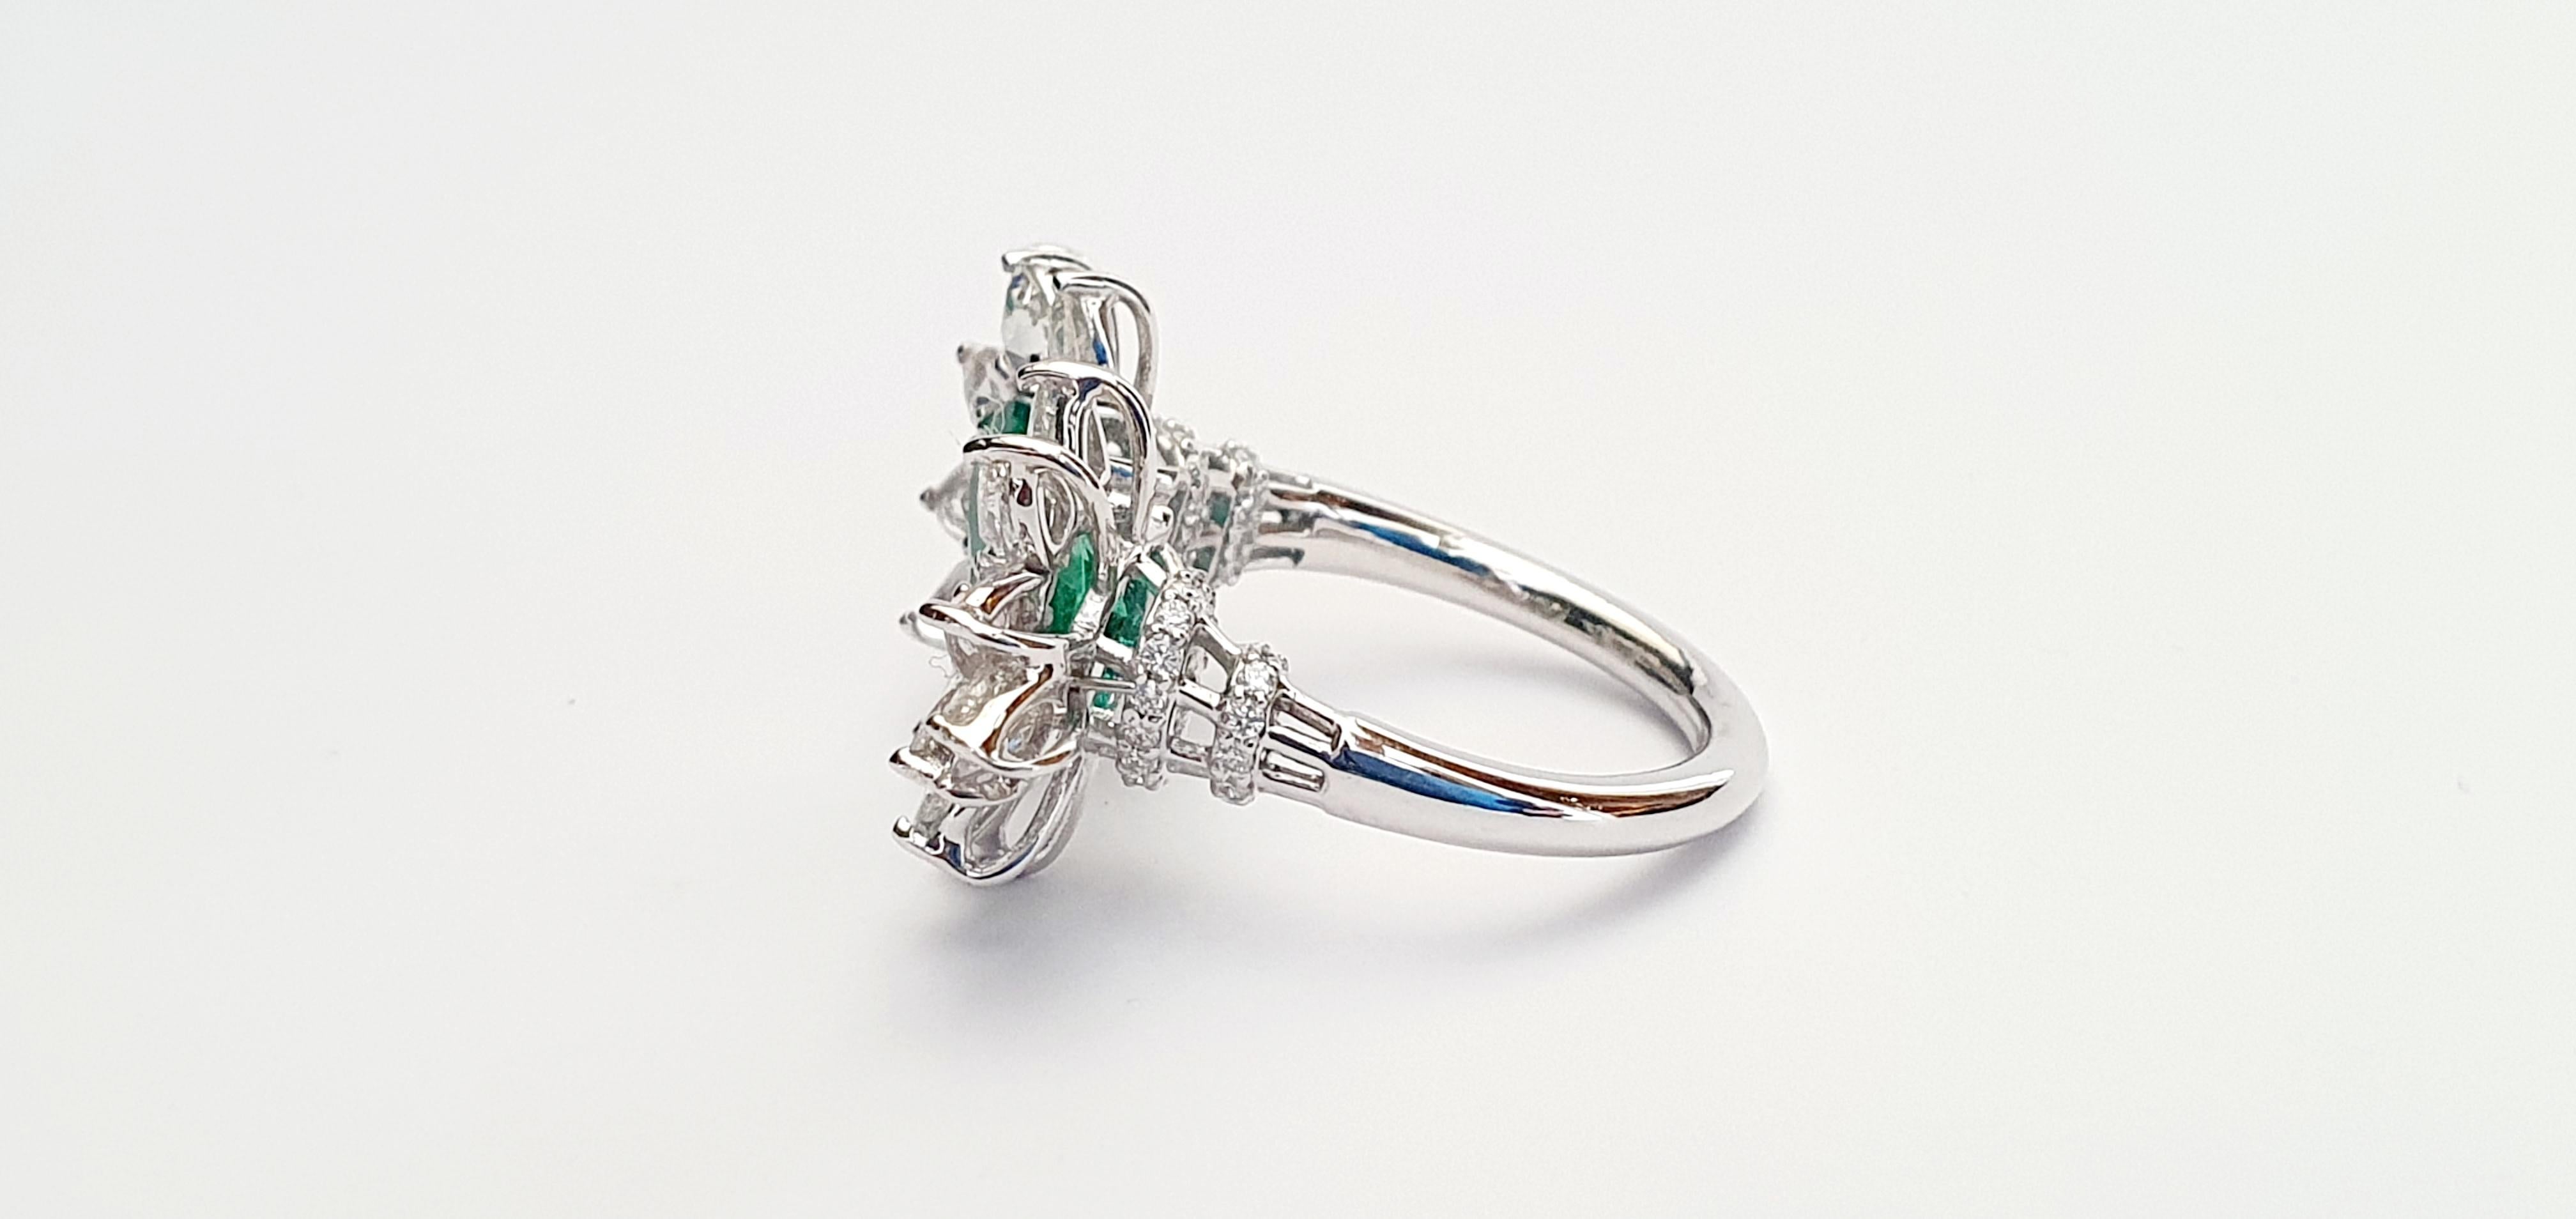 Emerald & Diamond Ring Studded in 18k White Gold In New Condition For Sale In Jaipur, Rajasthan